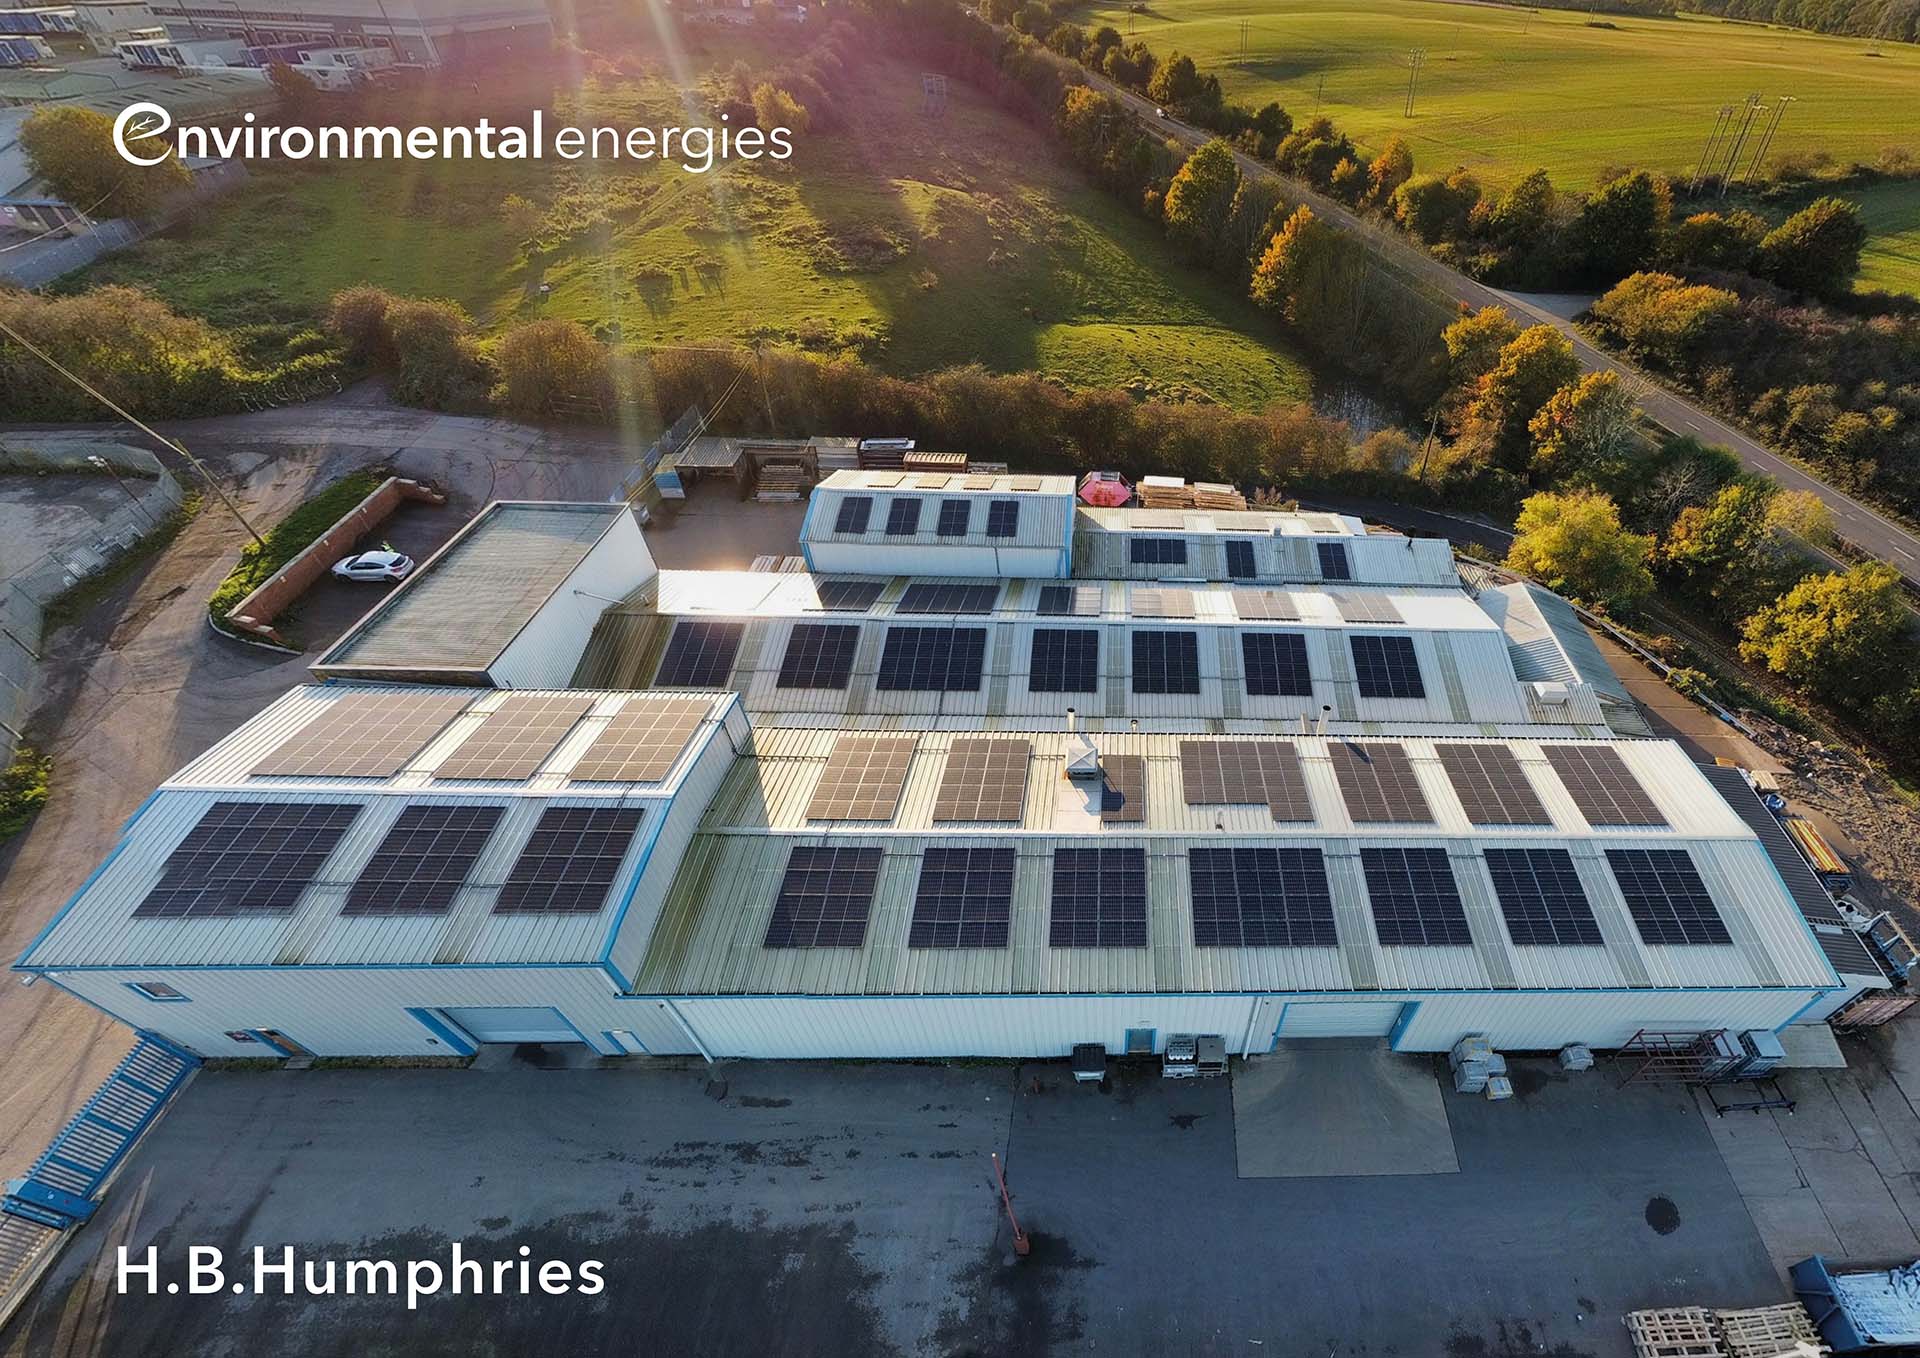 Energising Tomorrow with Environmental Energies: The HB Humphries Solar Story. | Northamptonshire Chamber of Commerce